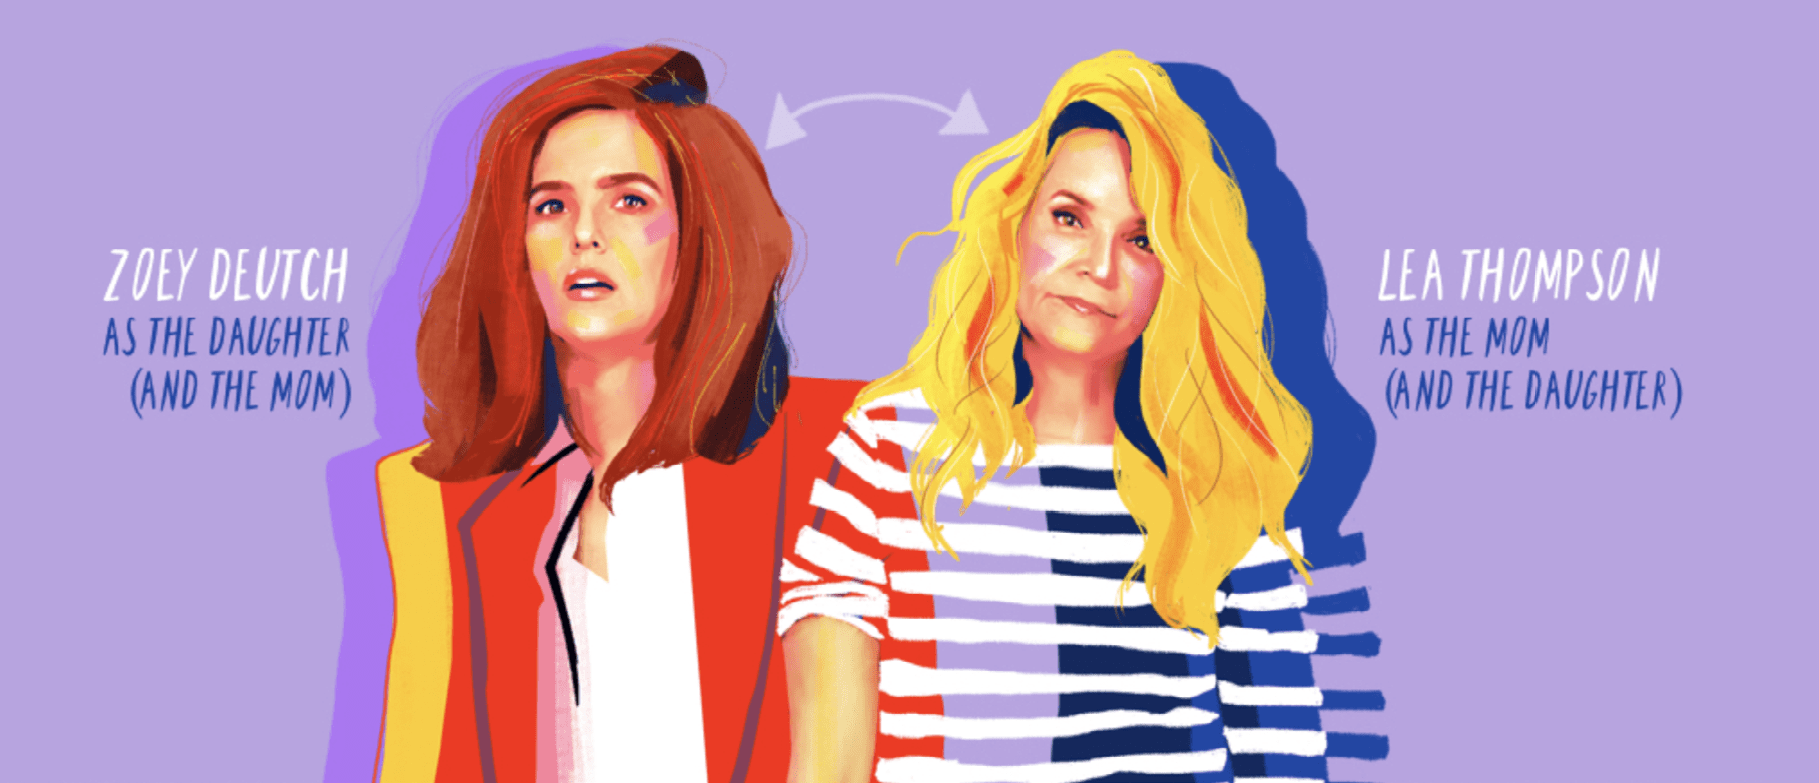 Find Your Next Podcast: A Total Switch Show by Zoey Deutch & Lea Thompson